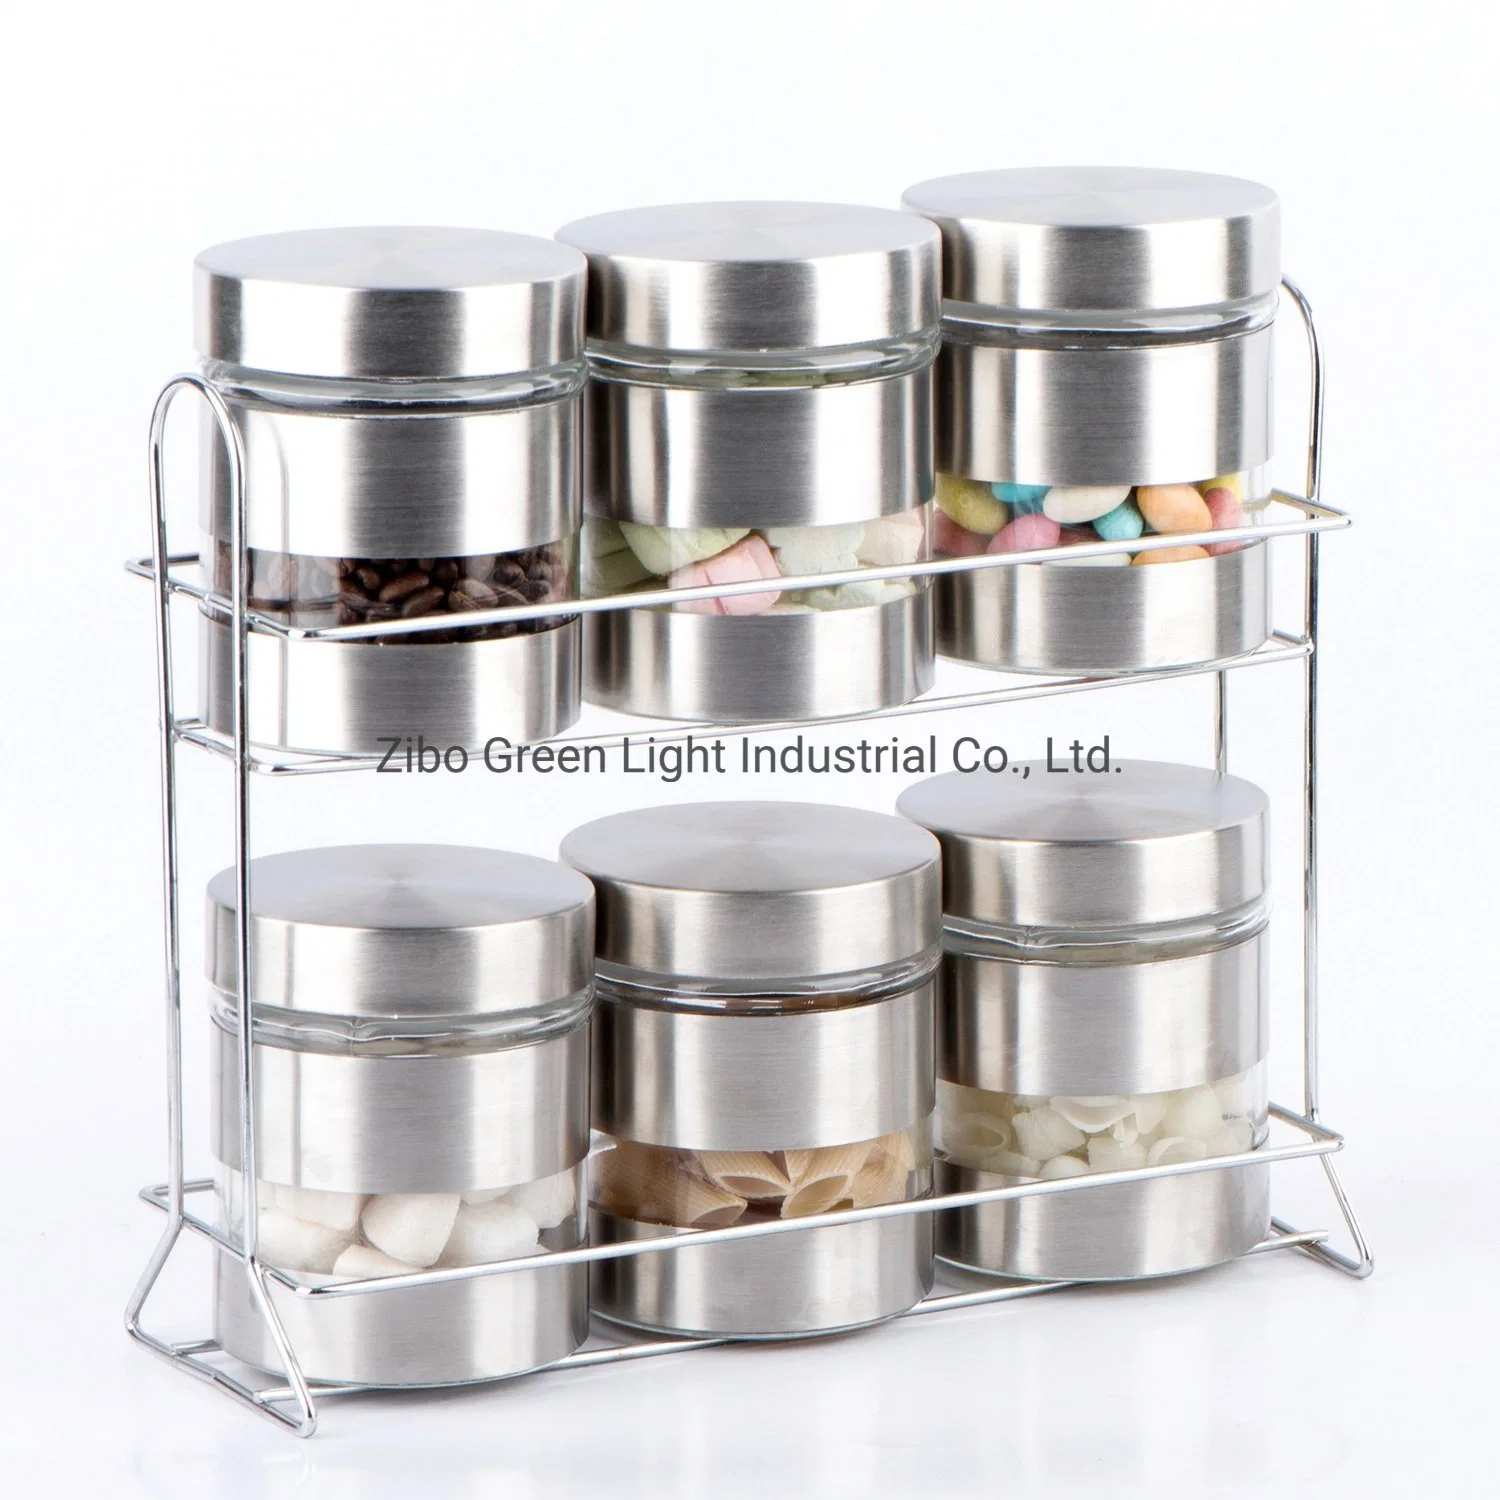 6PCS Glass Food Storage Jar with Stainless Steel Casing and Iron Rack for Candy Nuts